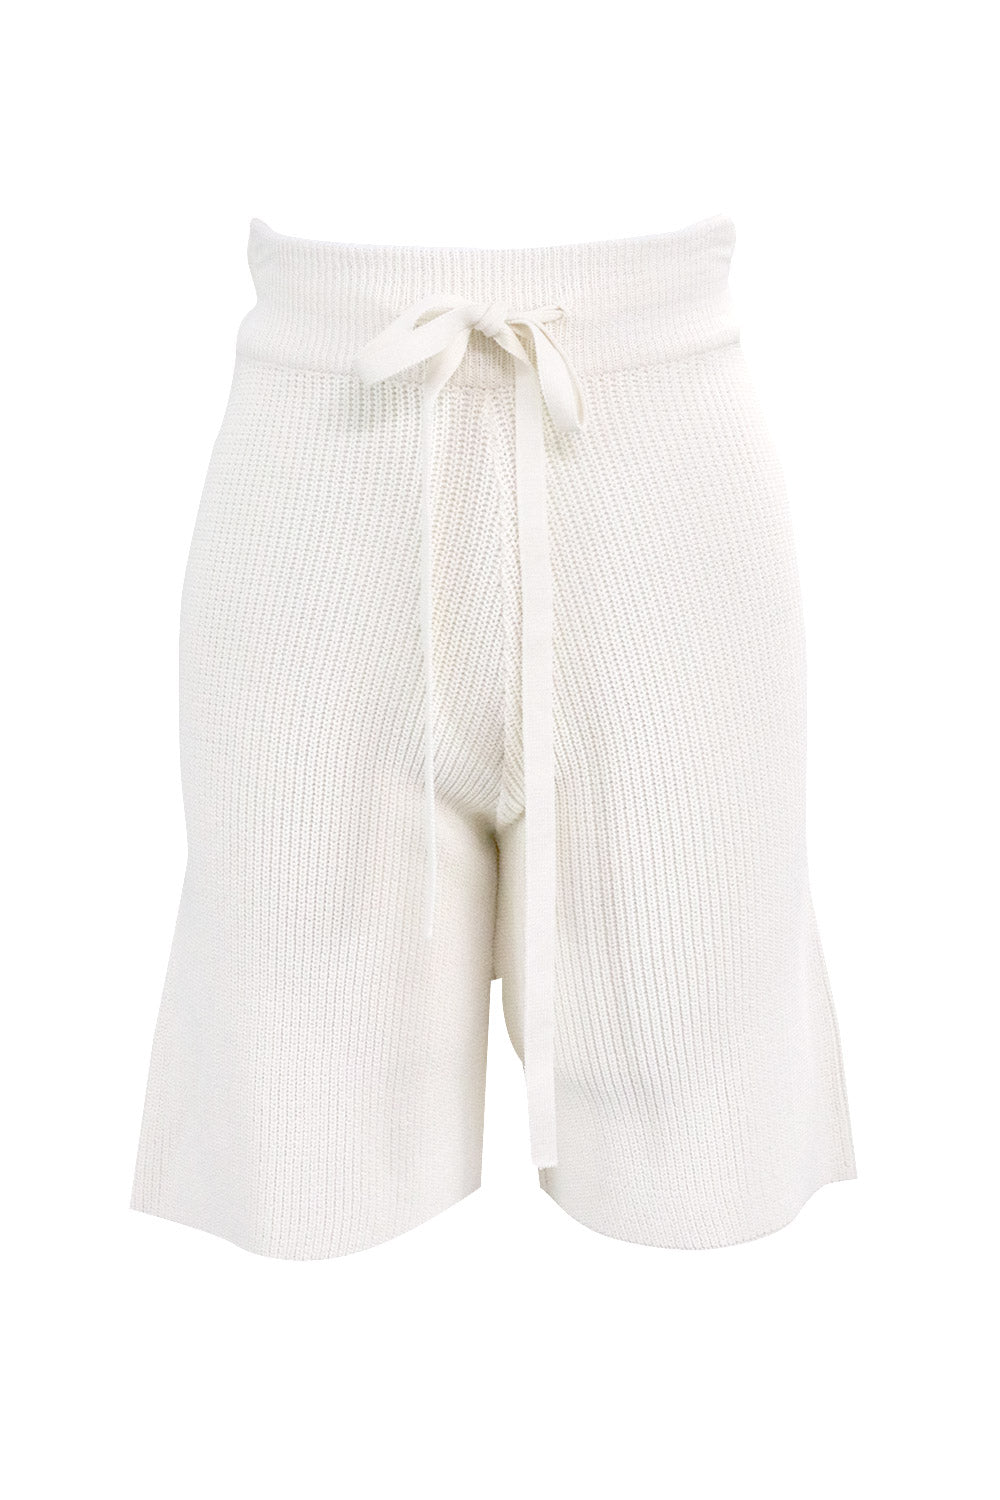 storets.com Sage Knitted Shorts